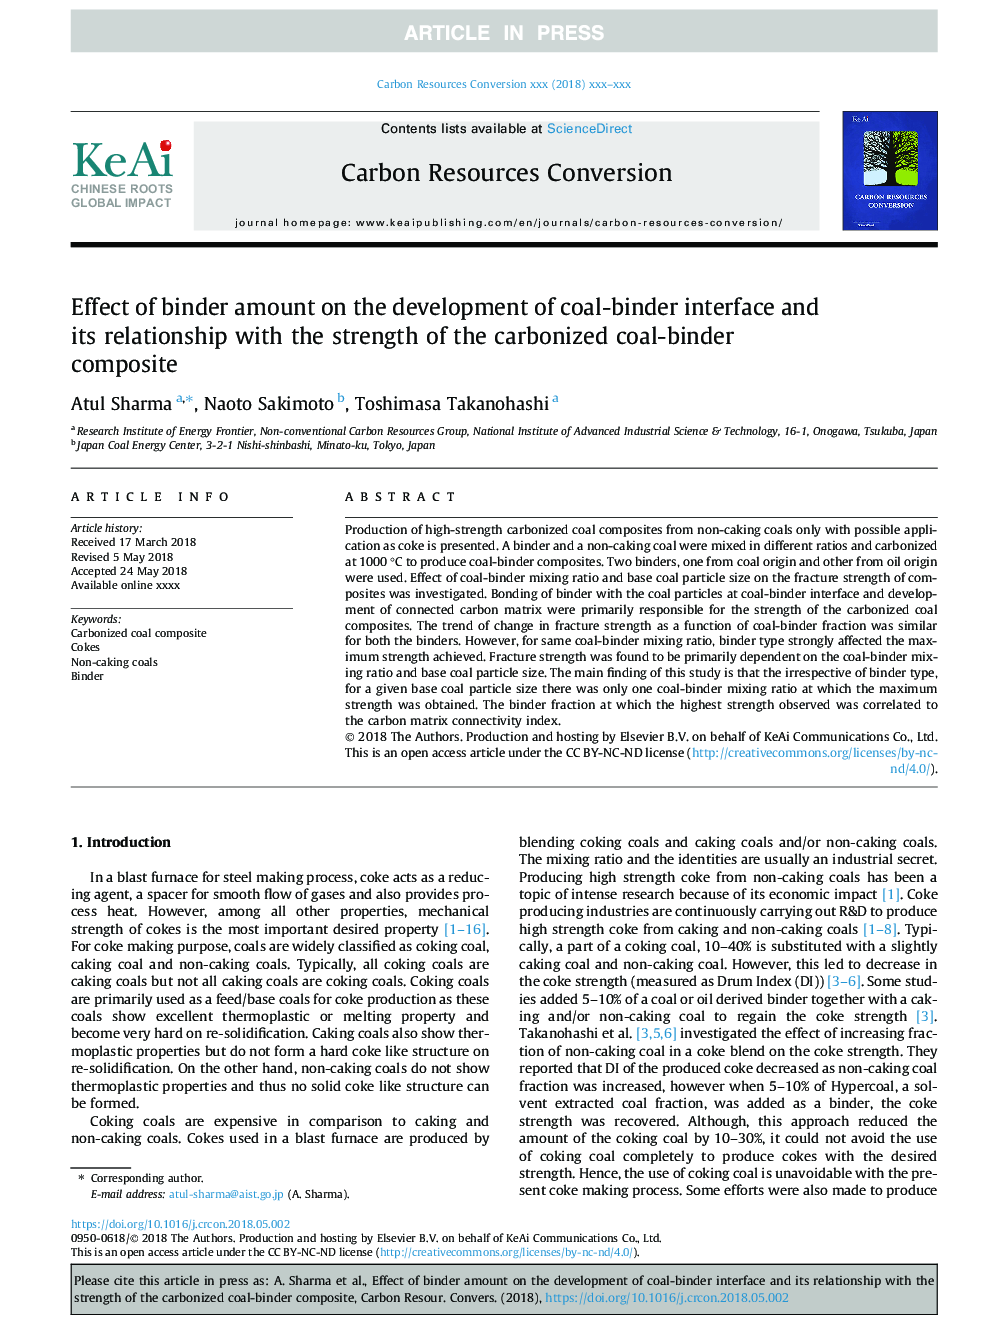 Effect of binder amount on the development of coal-binder interface and its relationship with the strength of the carbonized coal-binder composite